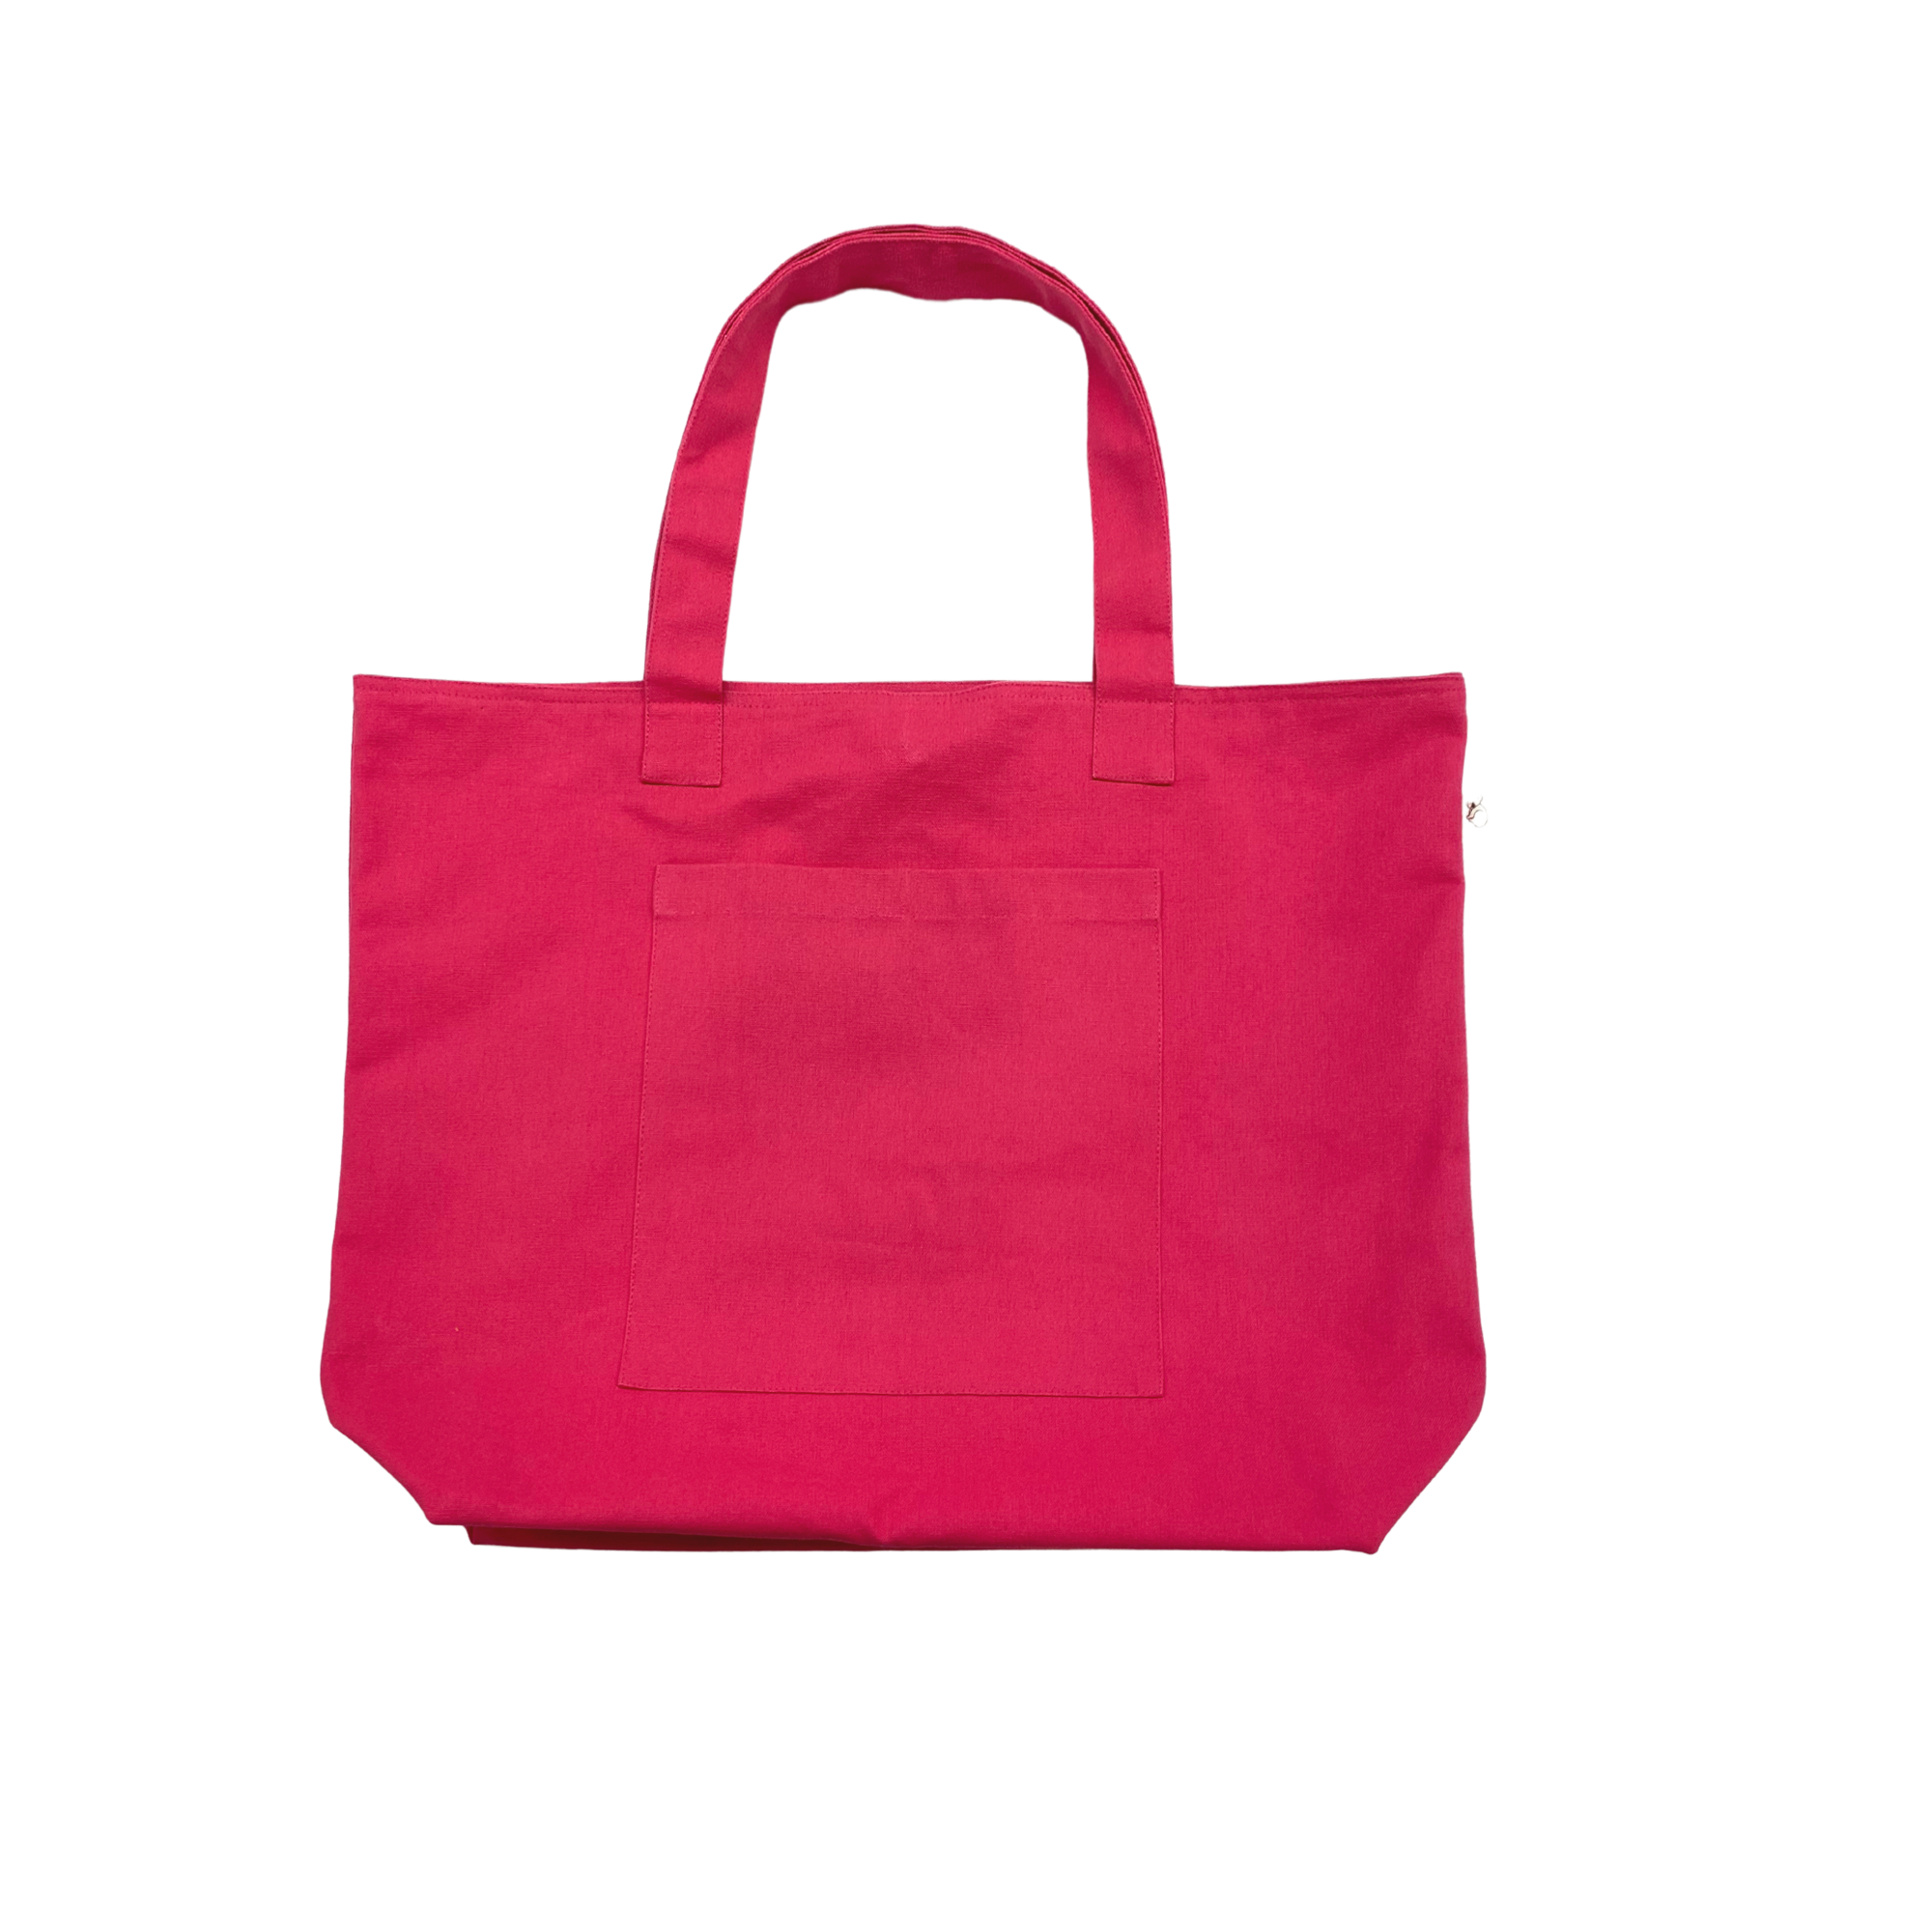 Hot Pink Everything Bag - BACK IN STOCK! - Quilted Koala